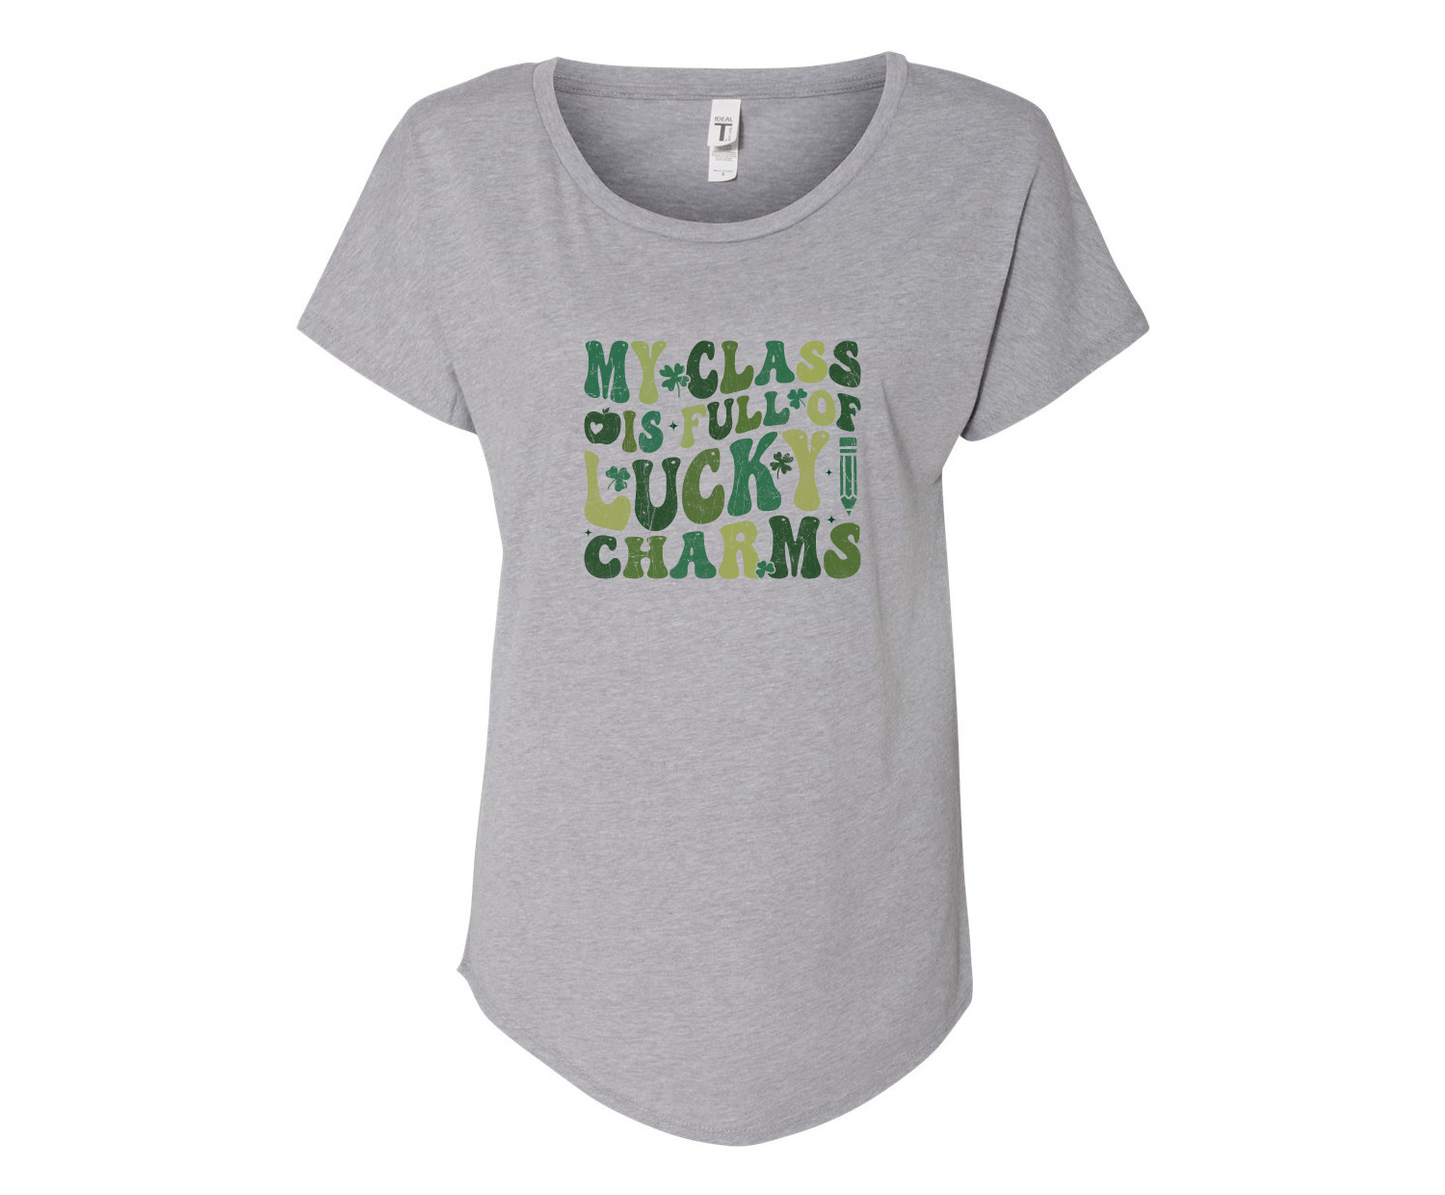 My Class Is Full Of Lucky Charms Ladies Tee Shirt - In Grey & White